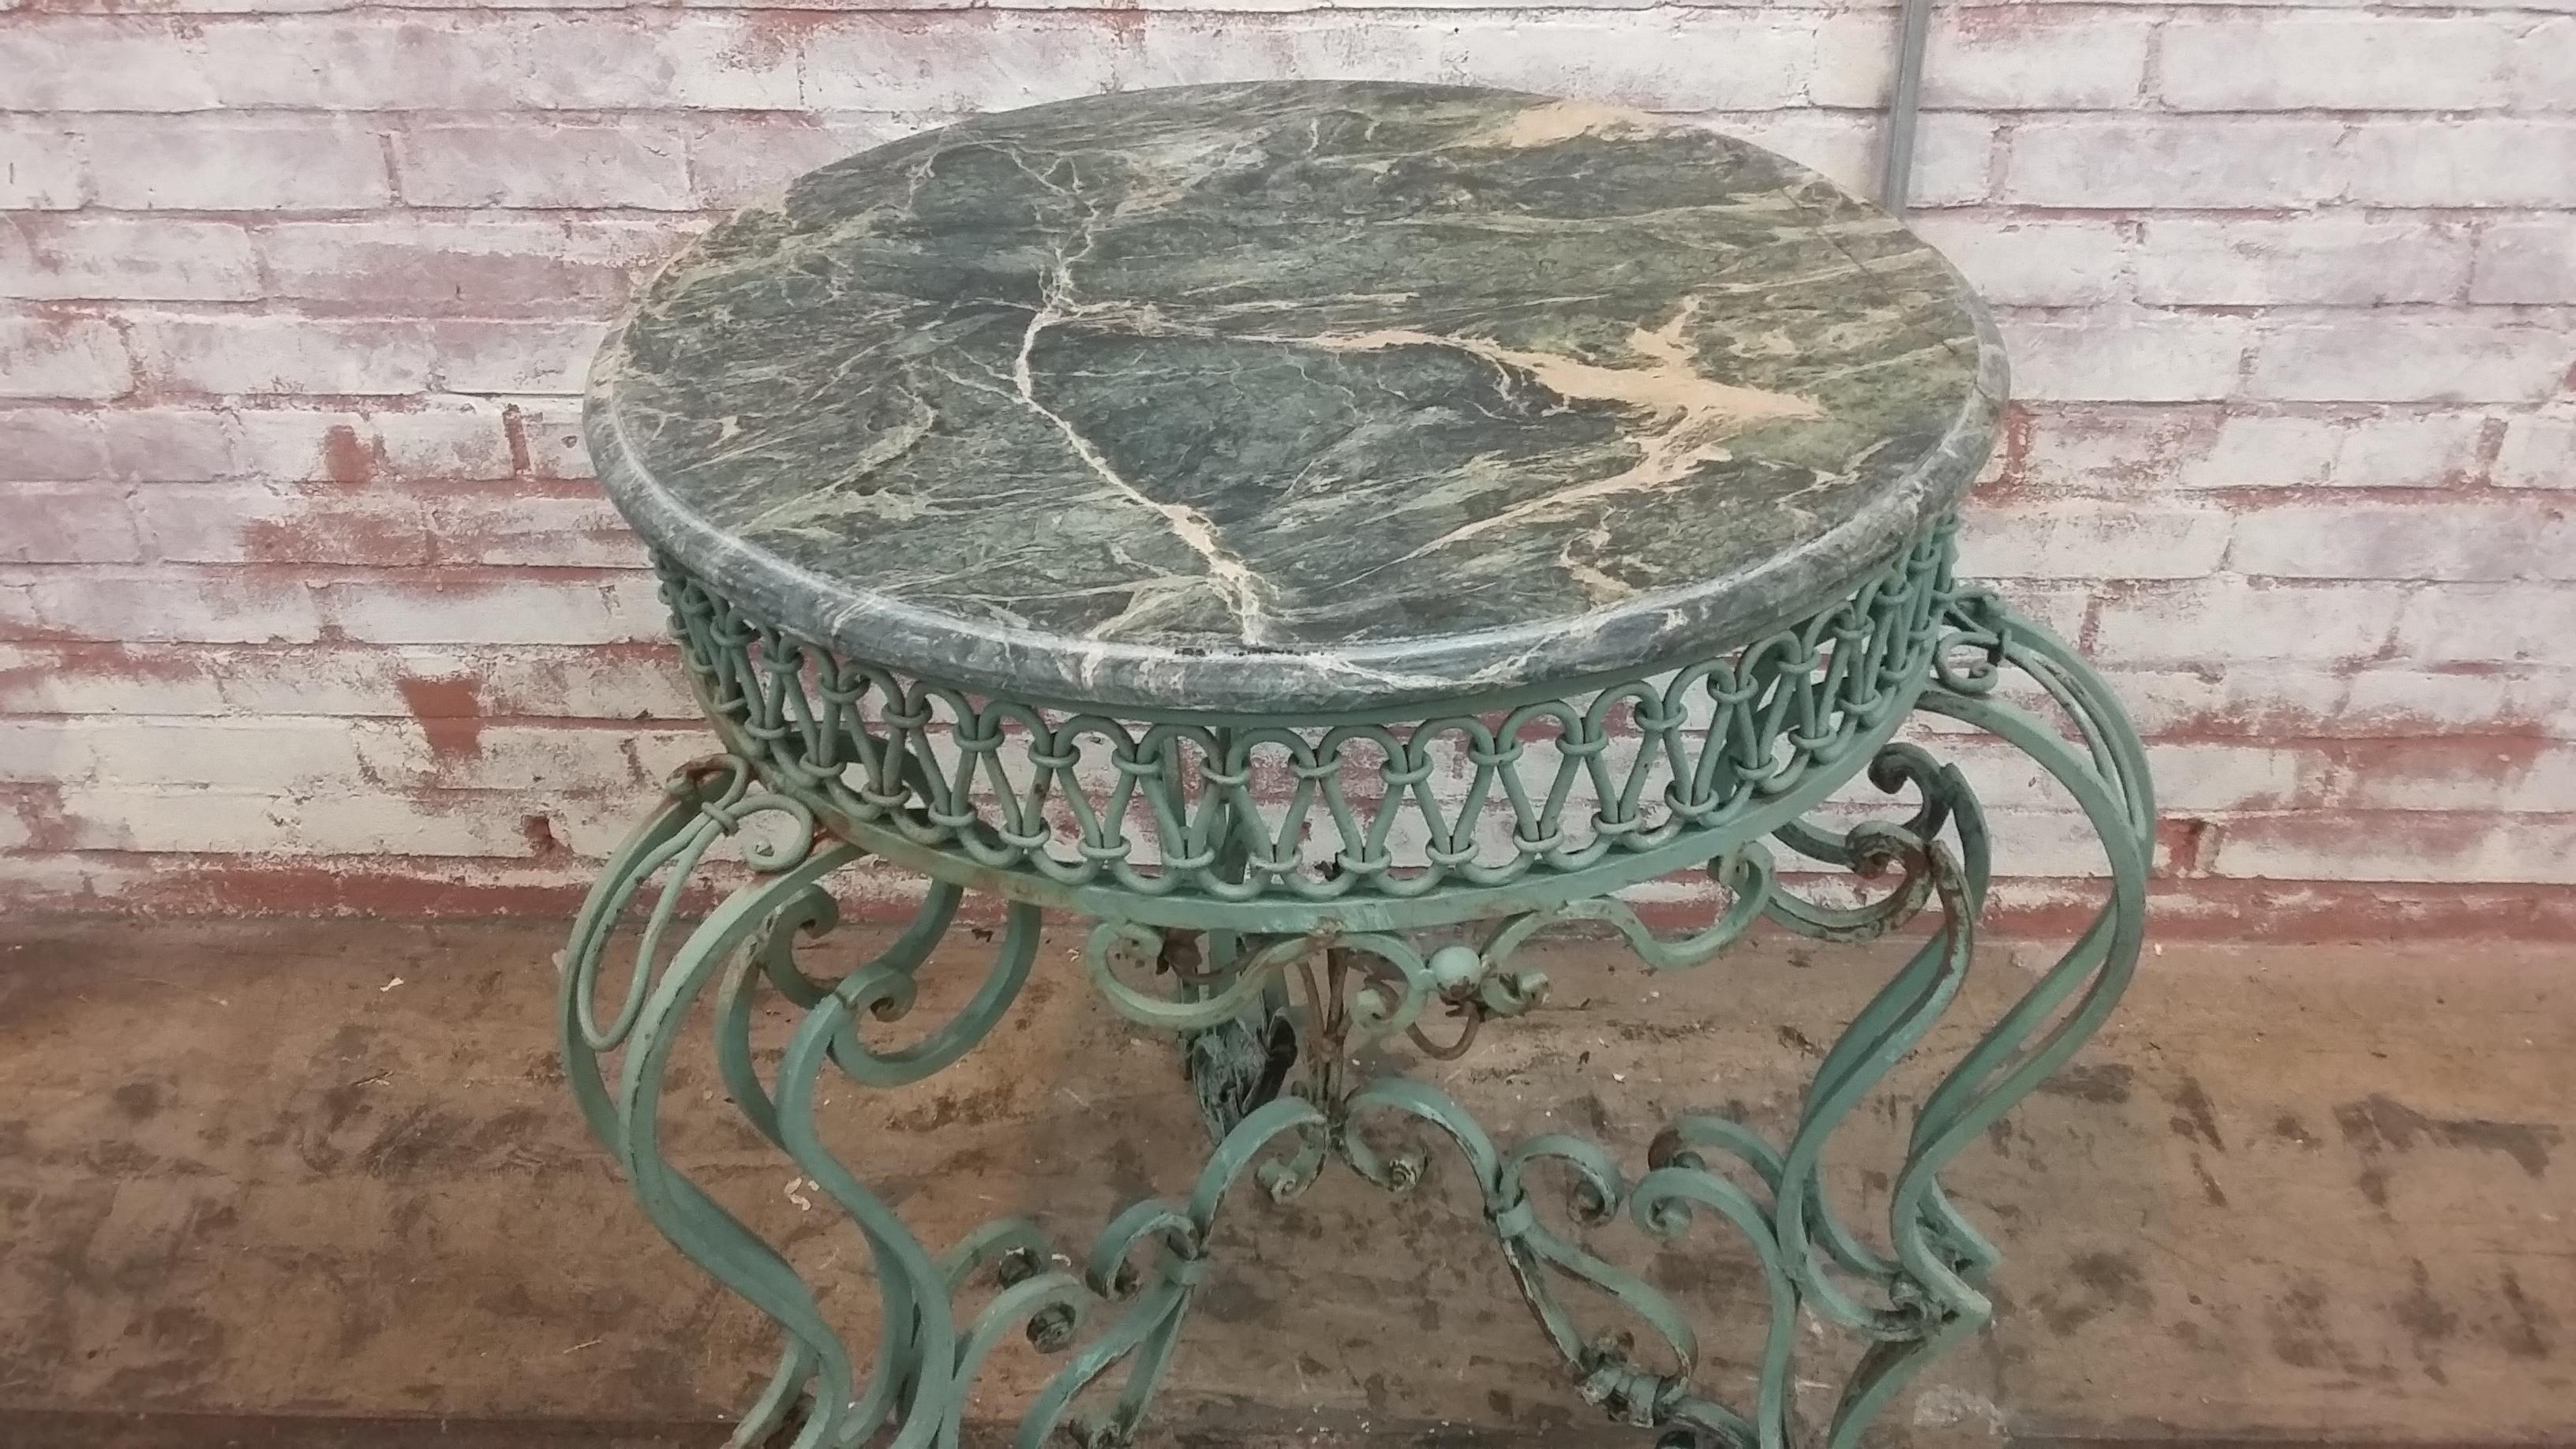 Beautiful vintage early 20th century wrought iron base with marble top. In a great verde green finish with grouping of flowers in the center of the base. Can be used inside or out. Perhaps use glass top rather than marble. Two pieces available.